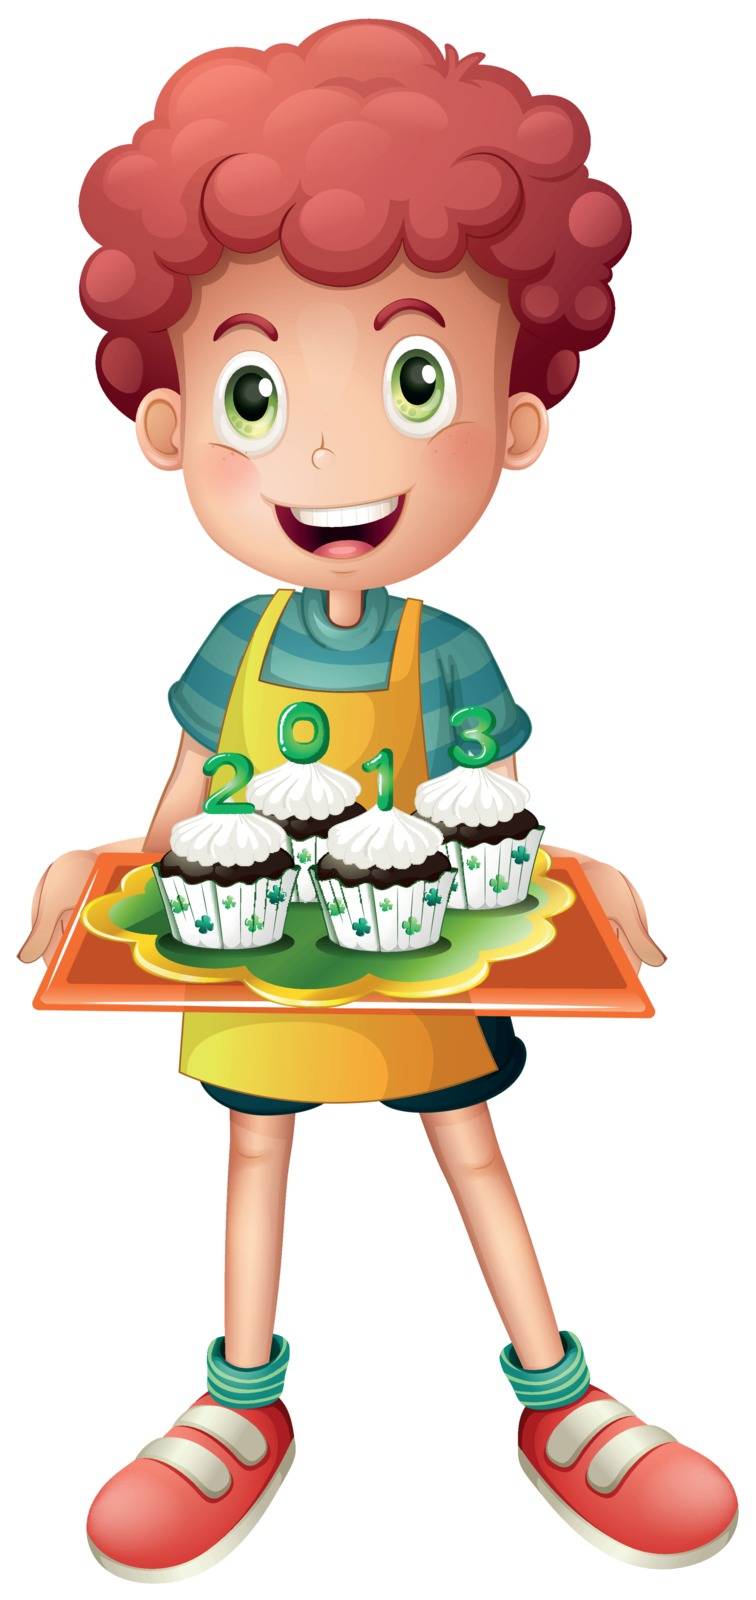 Illustration of a boy holding a tray with four cupcakes on a white background